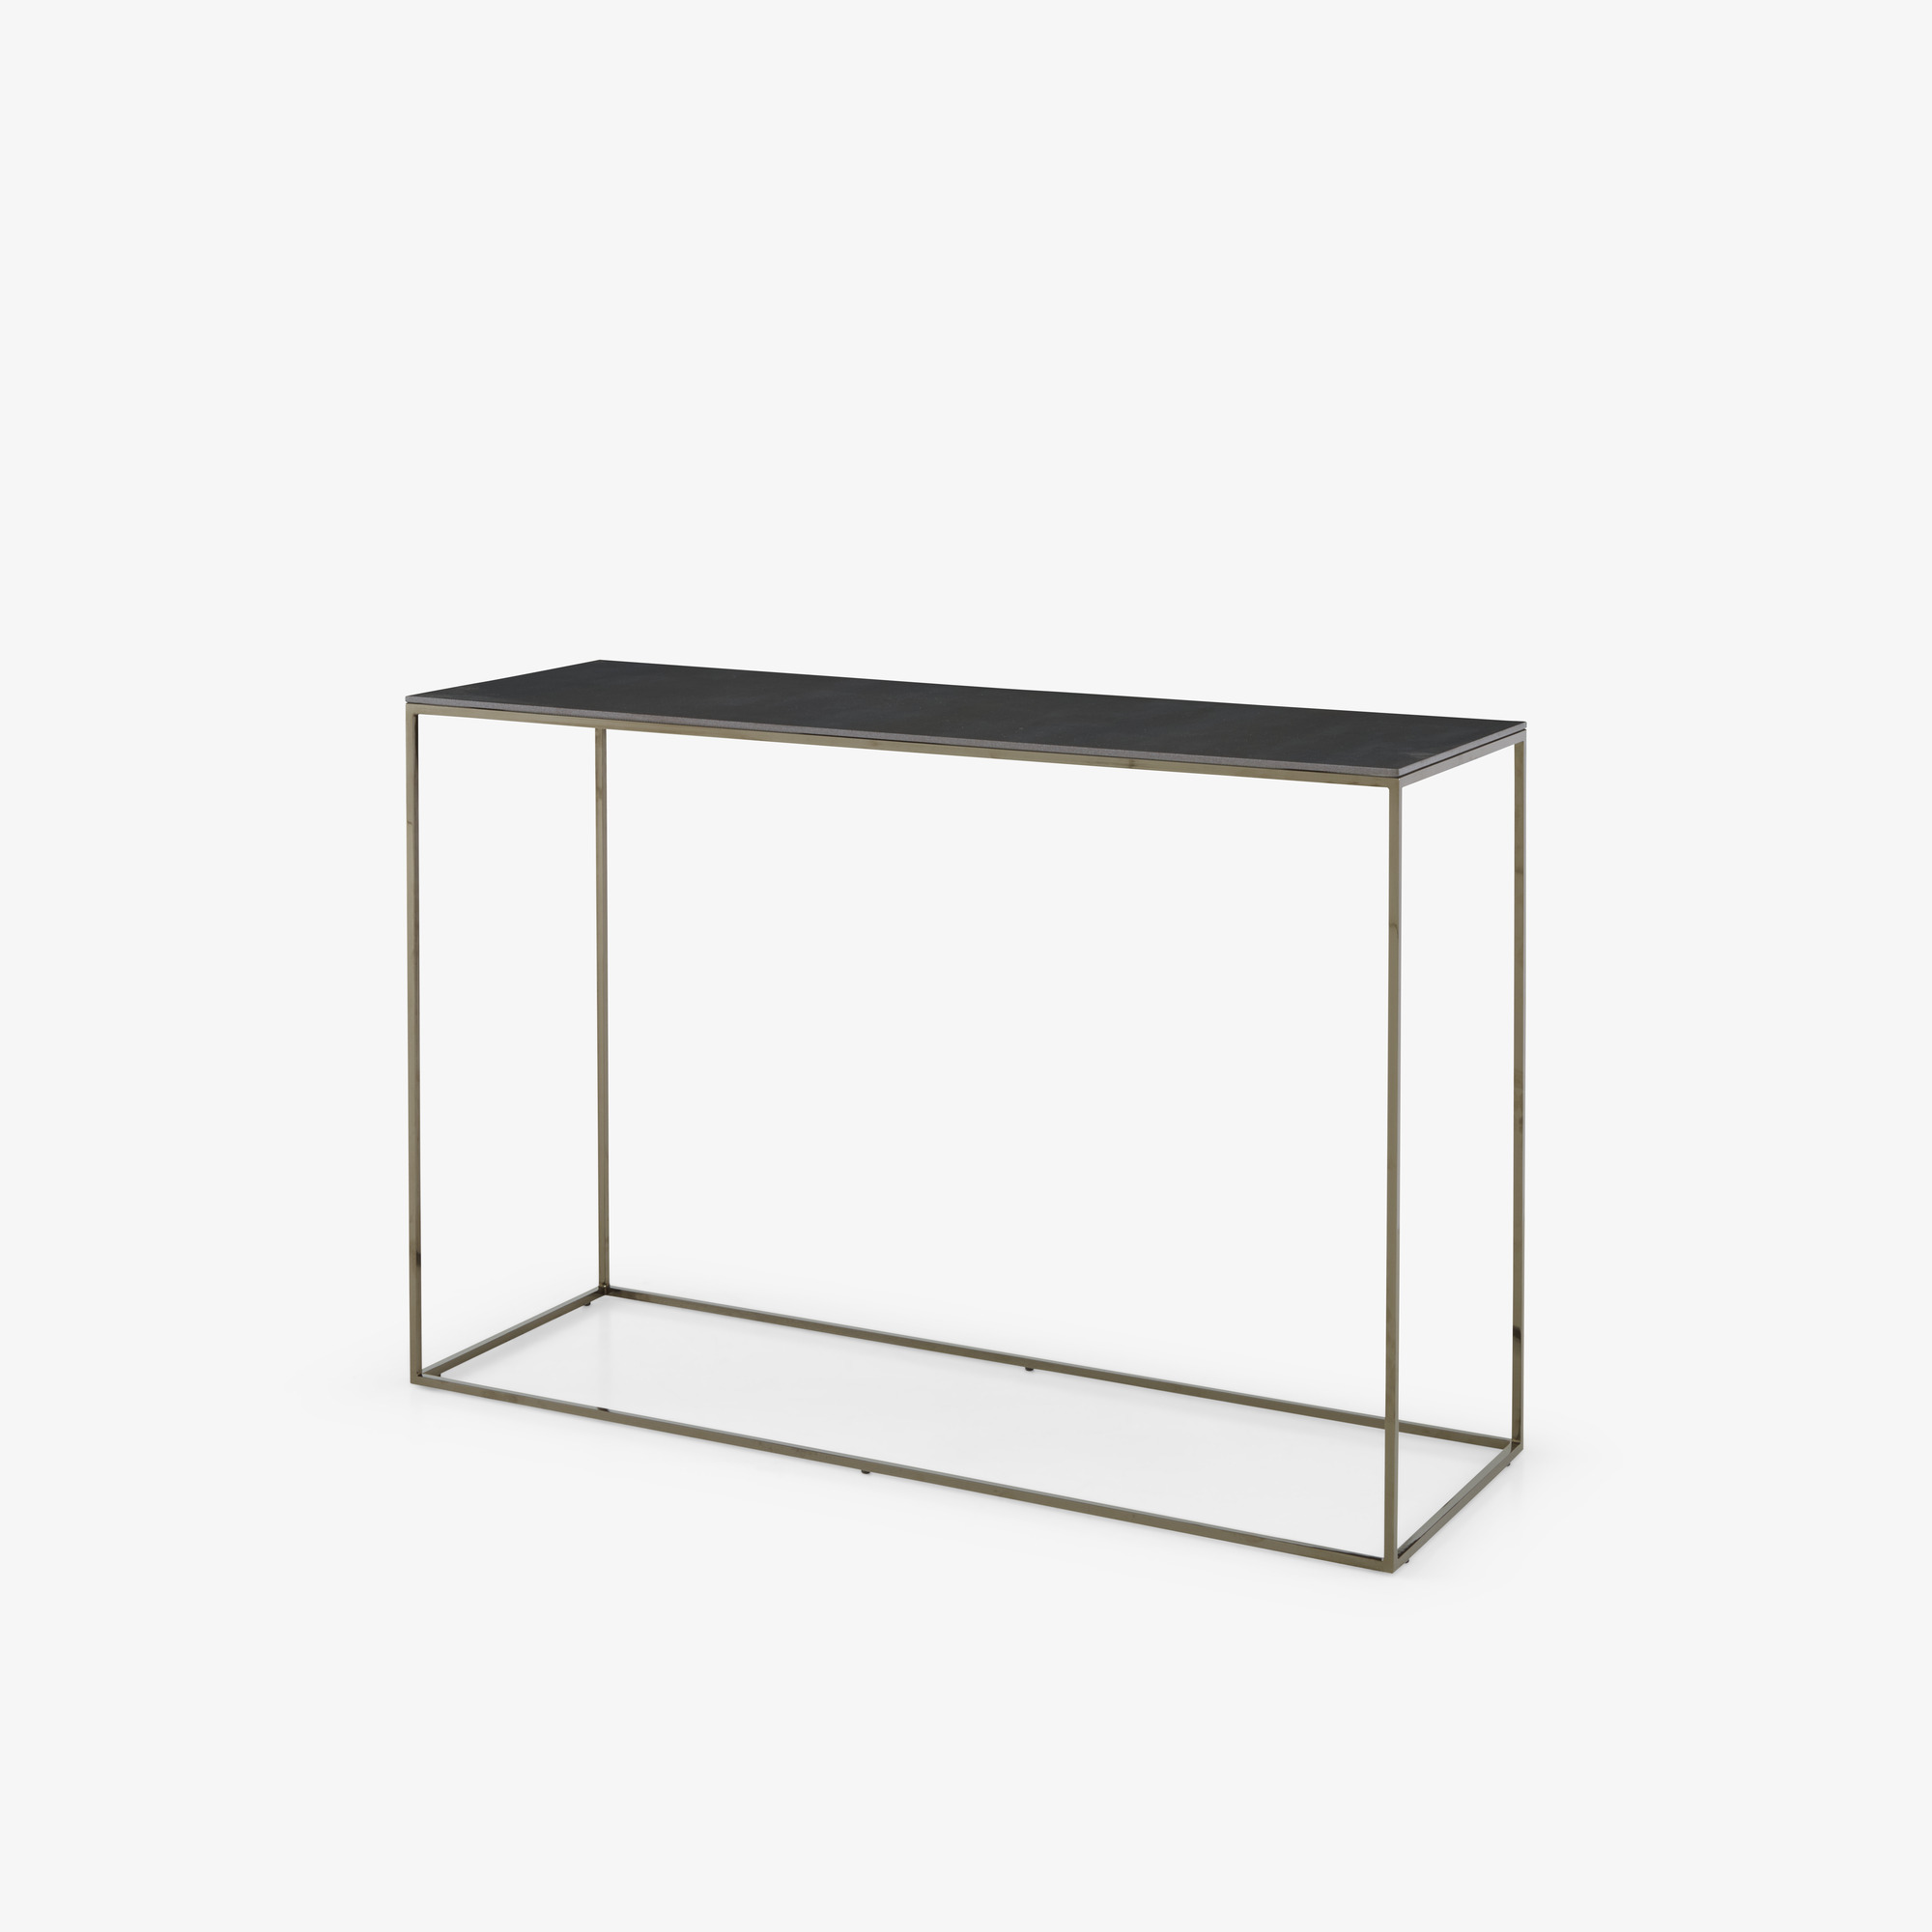 Image Console table 2